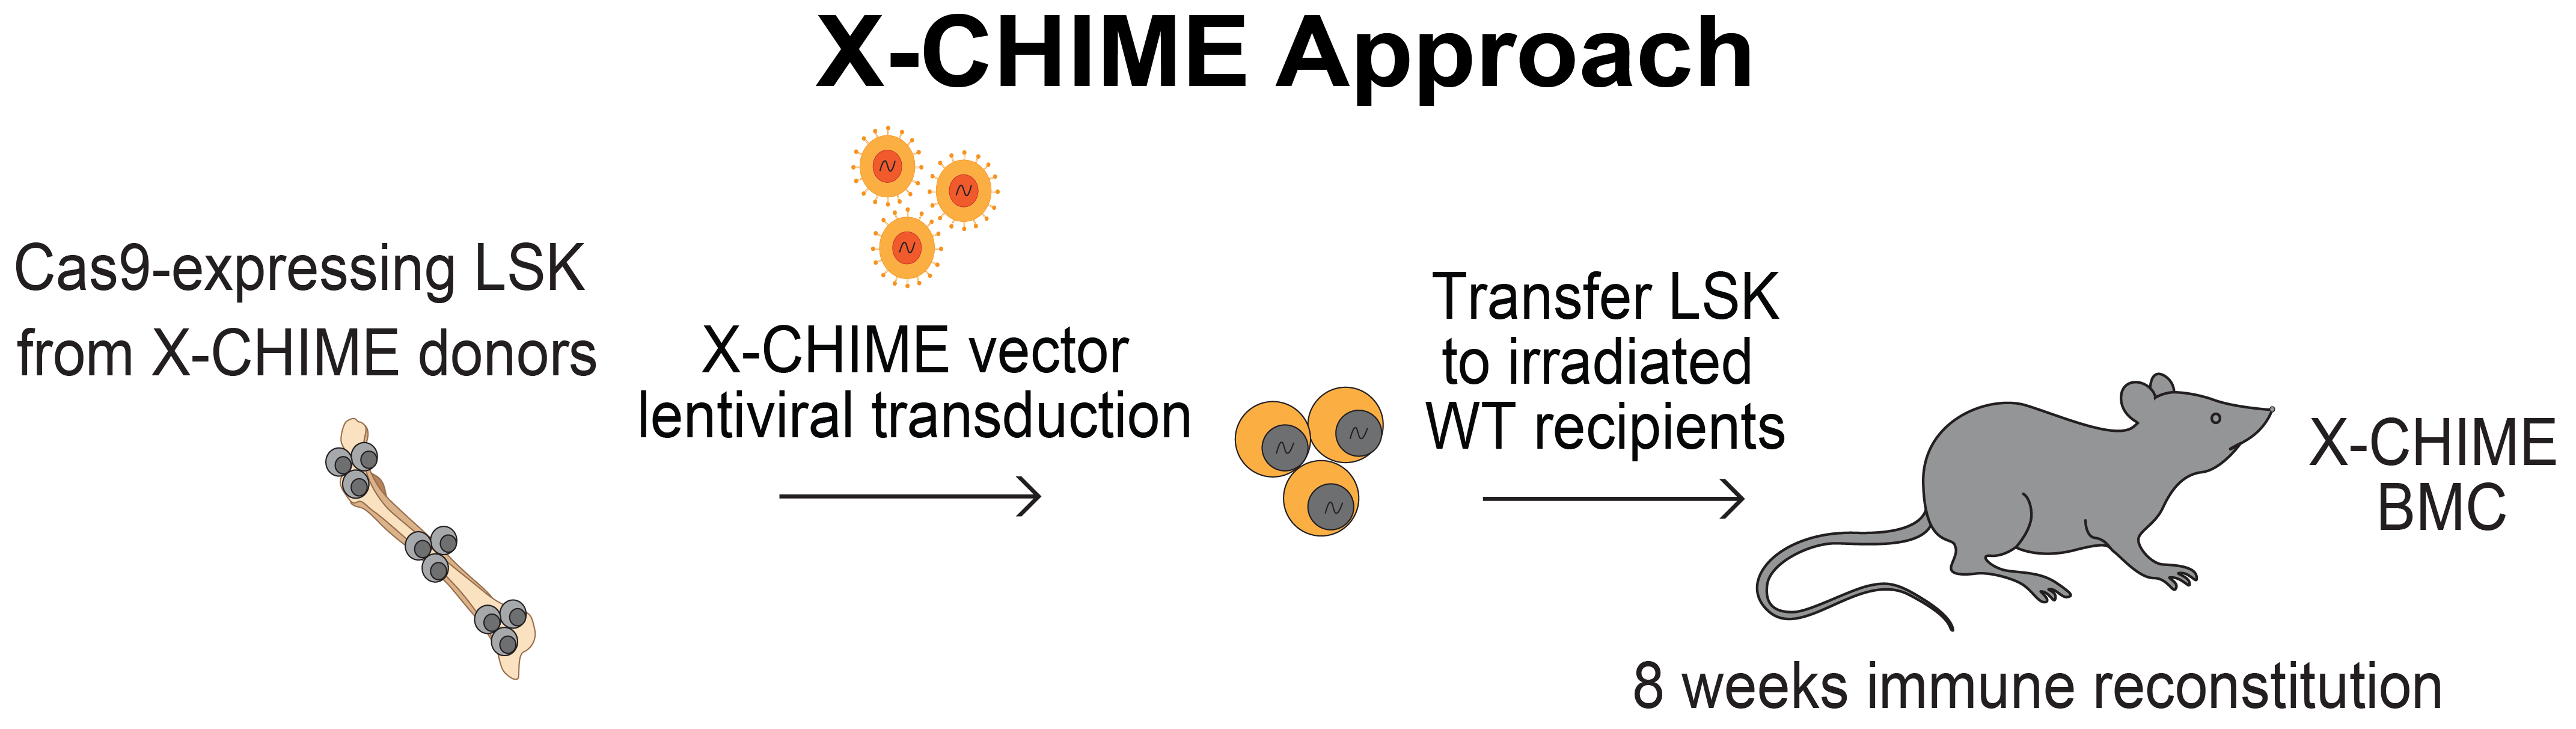 Schematic showing the X-CHIME approach.